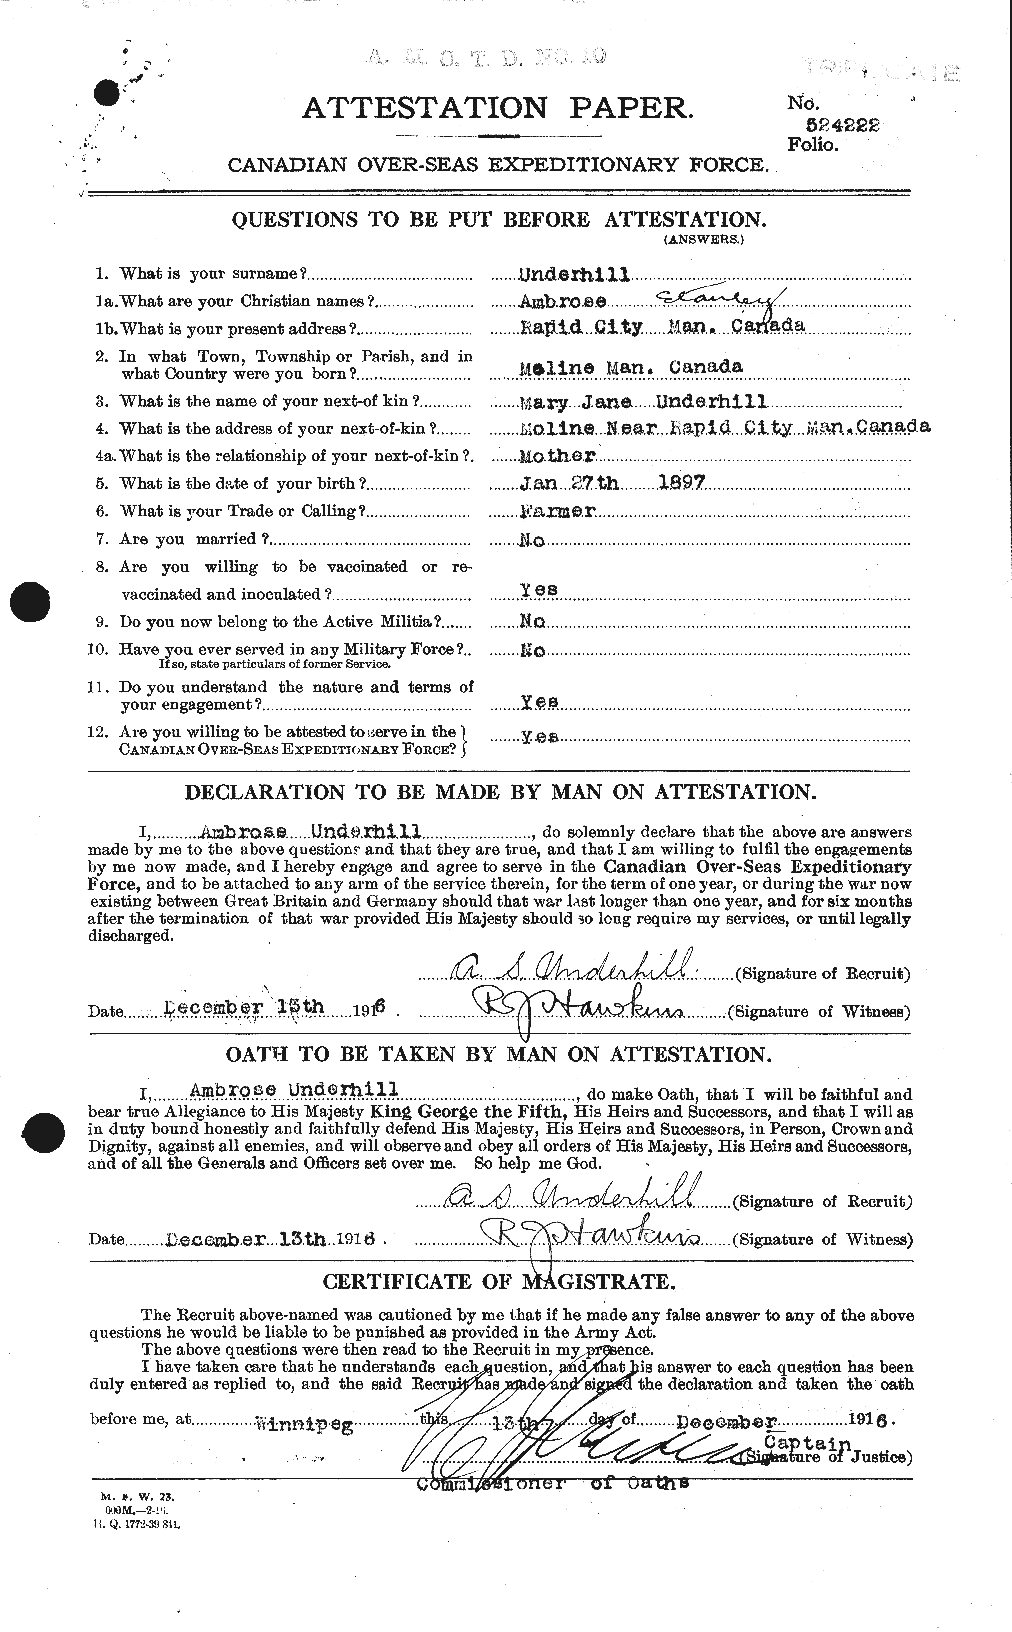 Personnel Records of the First World War - CEF 647073a